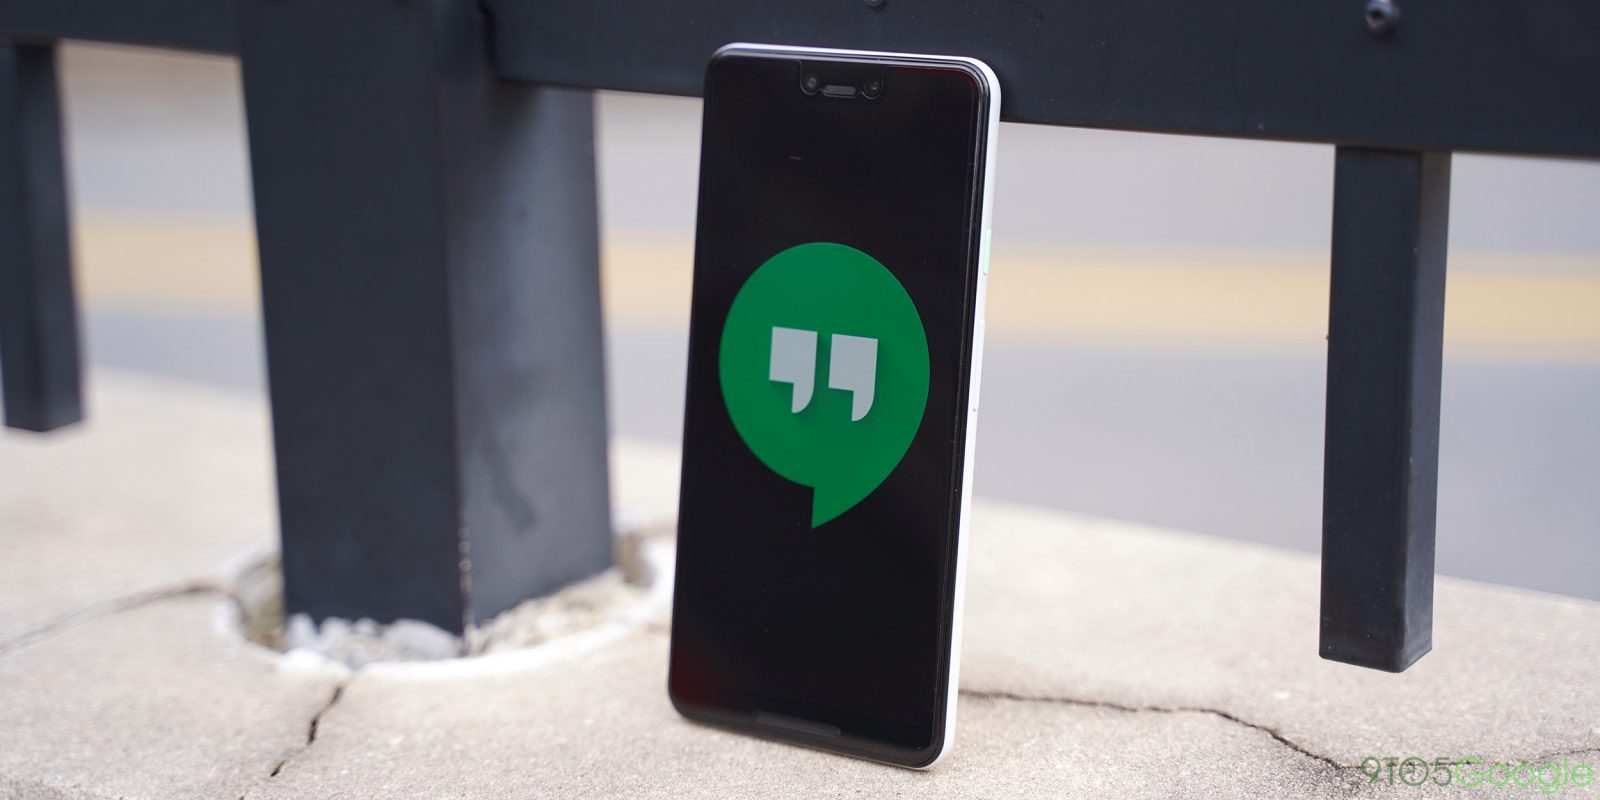 google chrome for android google hangouts